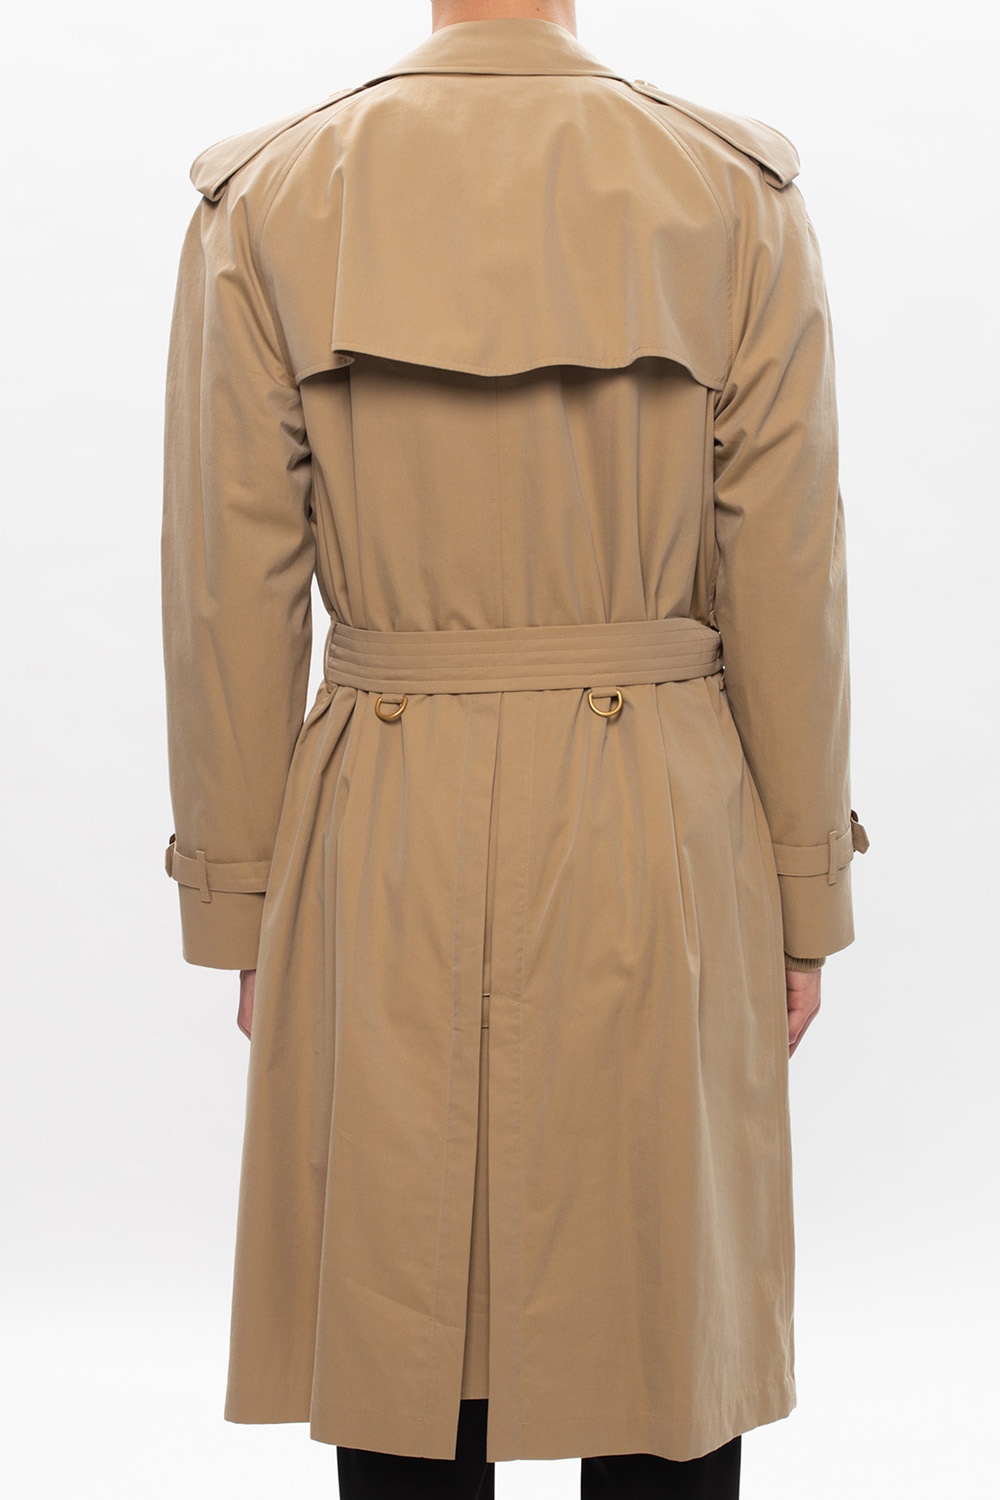 burberry trench coat westminster